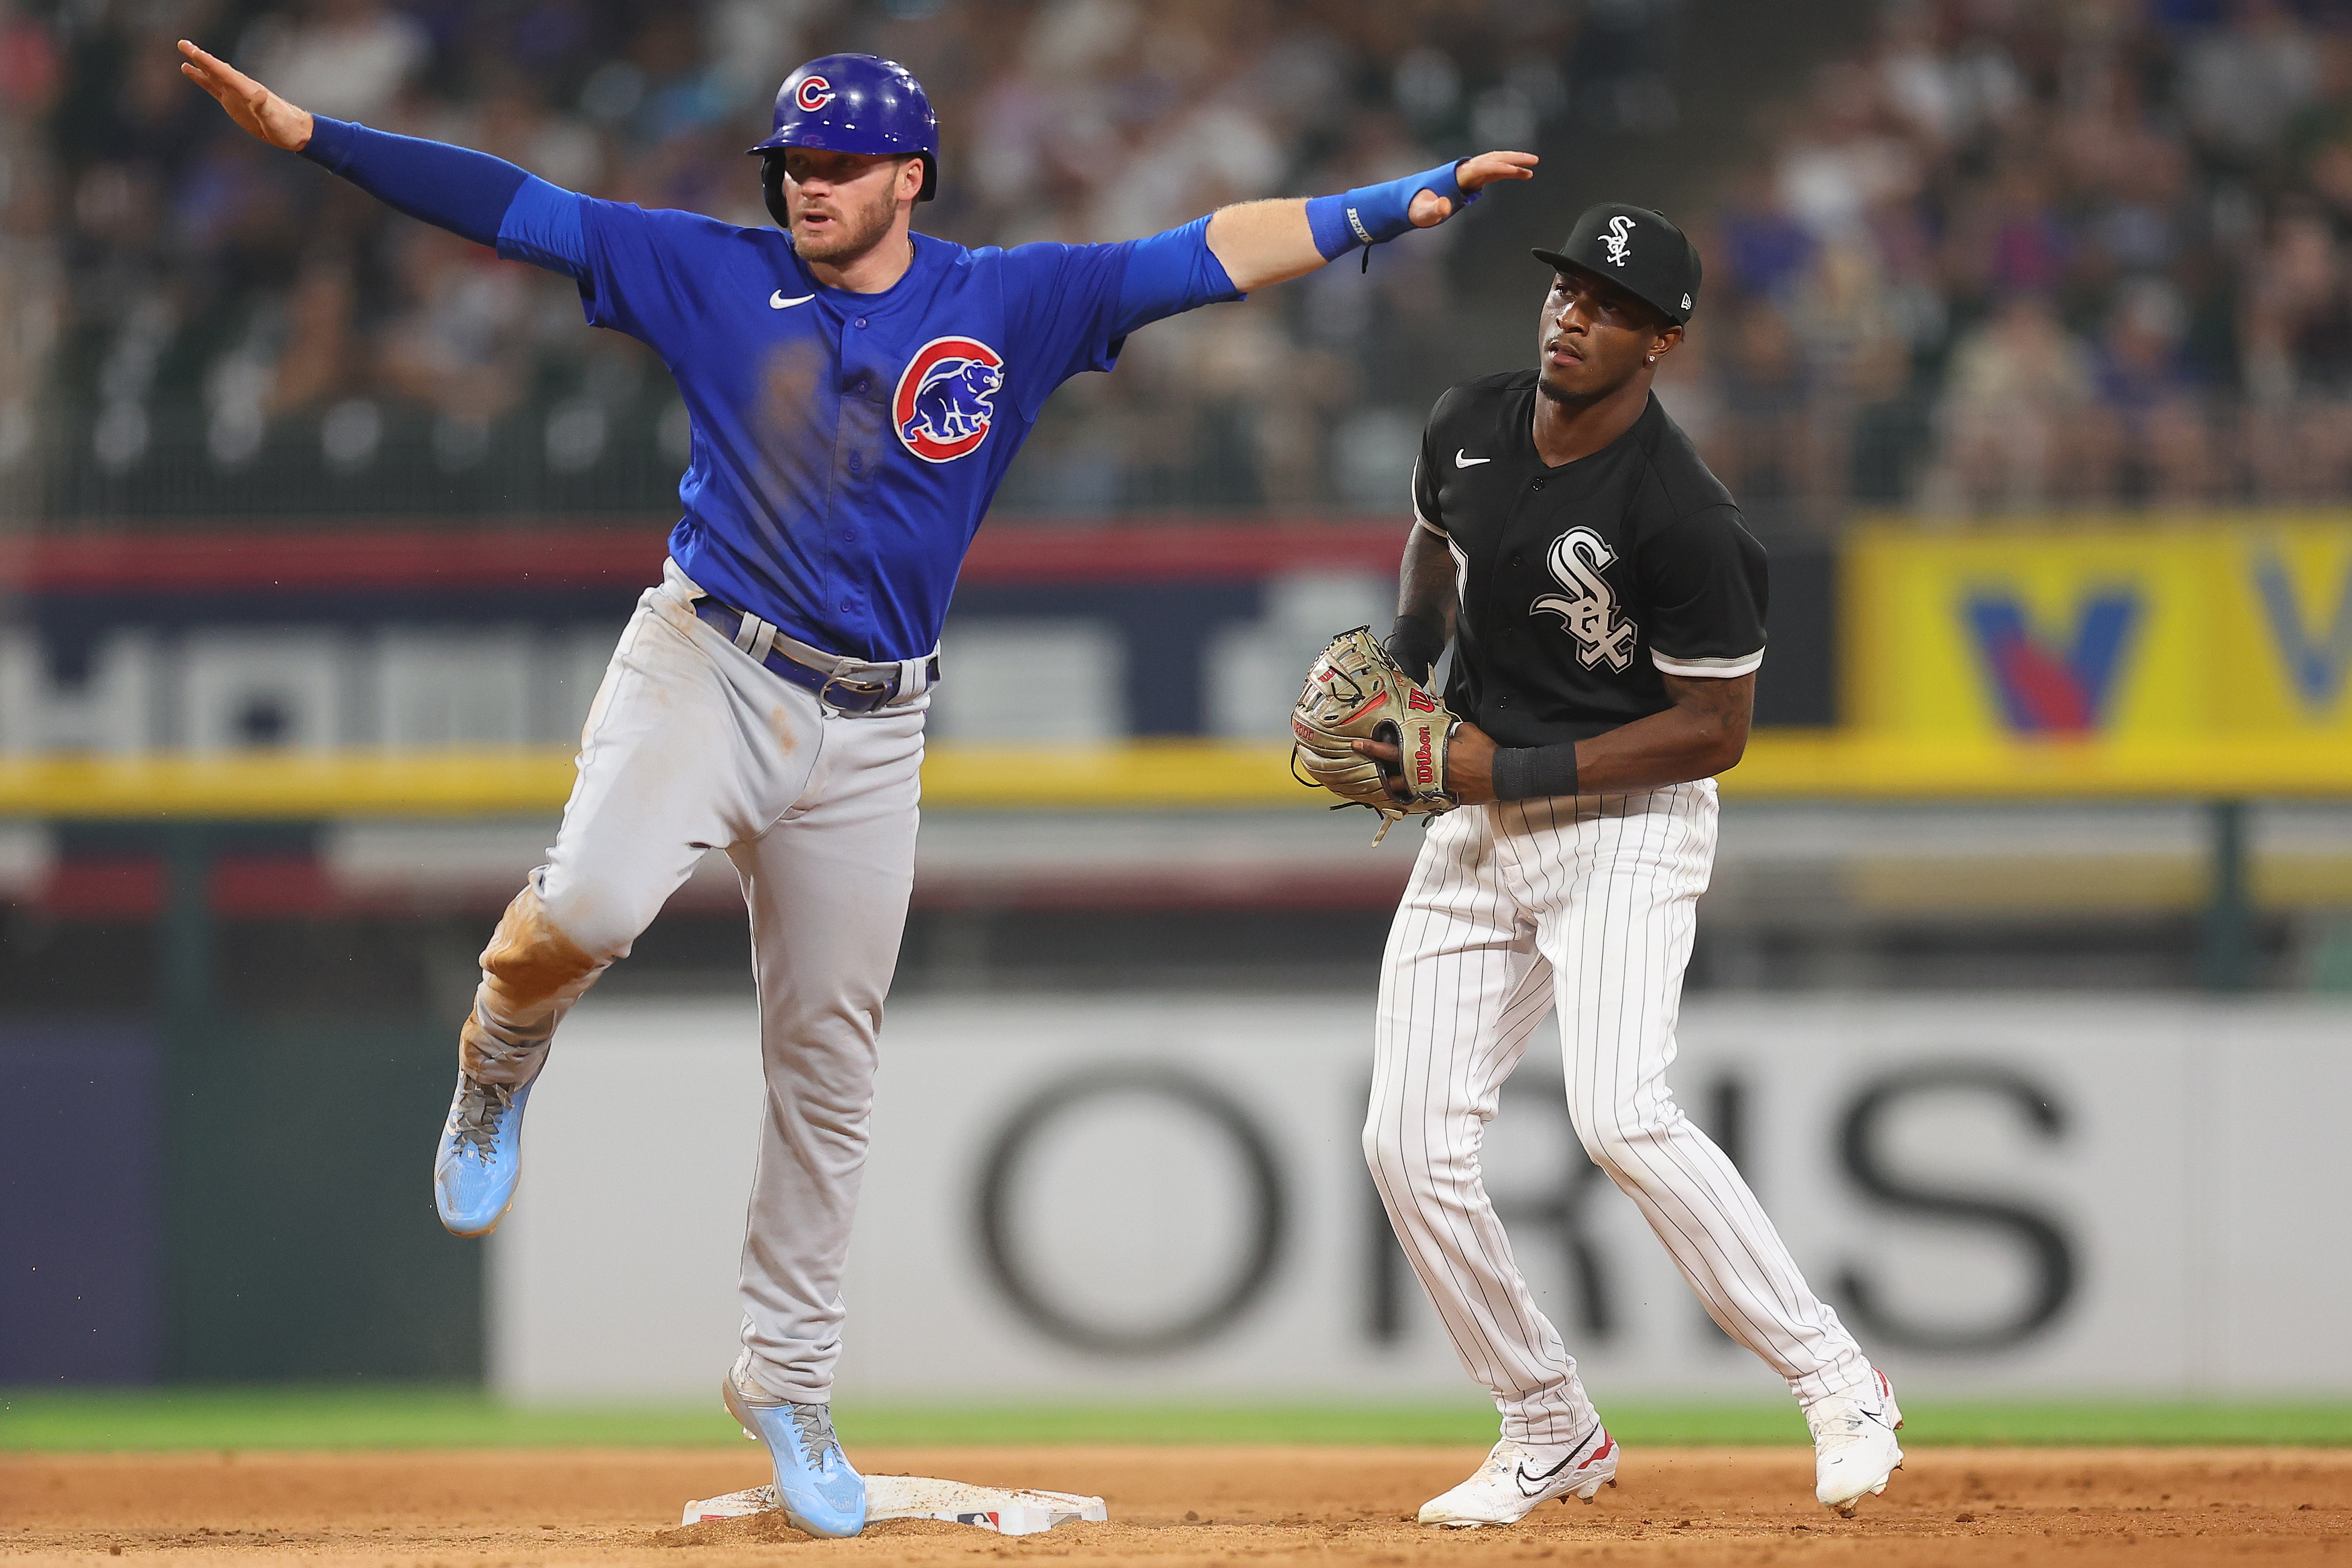 White Sox beat Cubs in first game of Crosstown Classic - Windy City Times